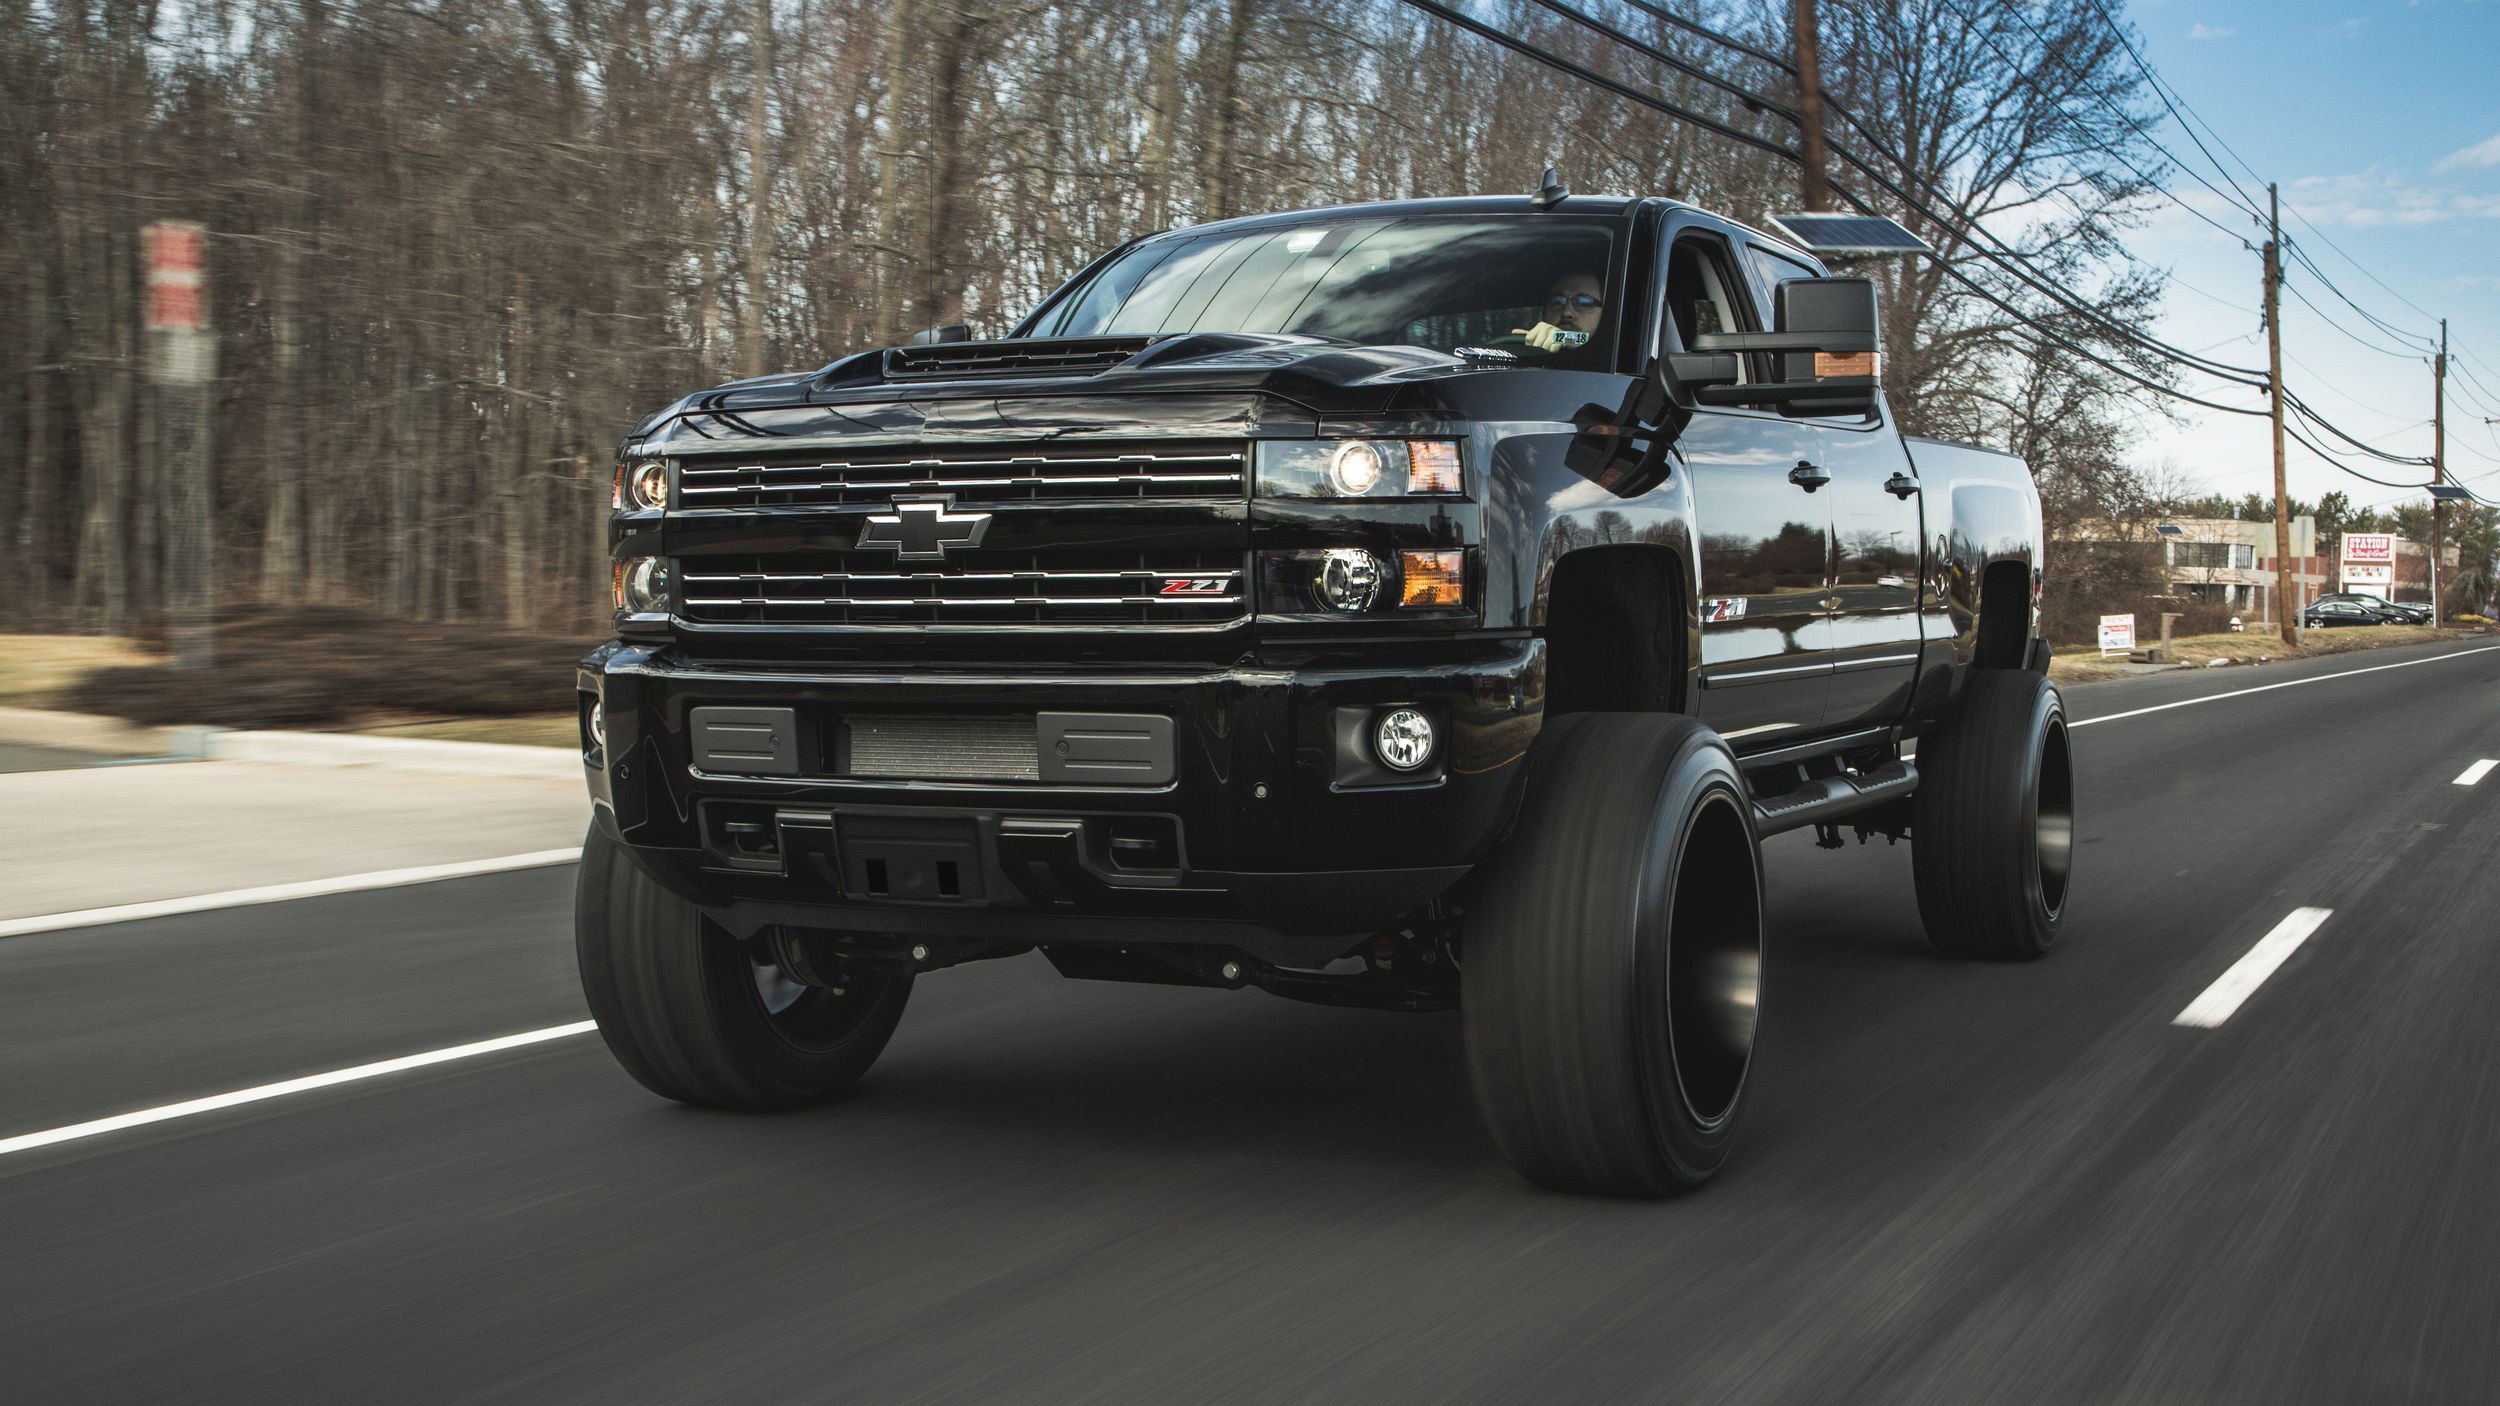 Aftermarket Side Mirrors on Black Lifted Chevy Silverado - Photo by CARiD